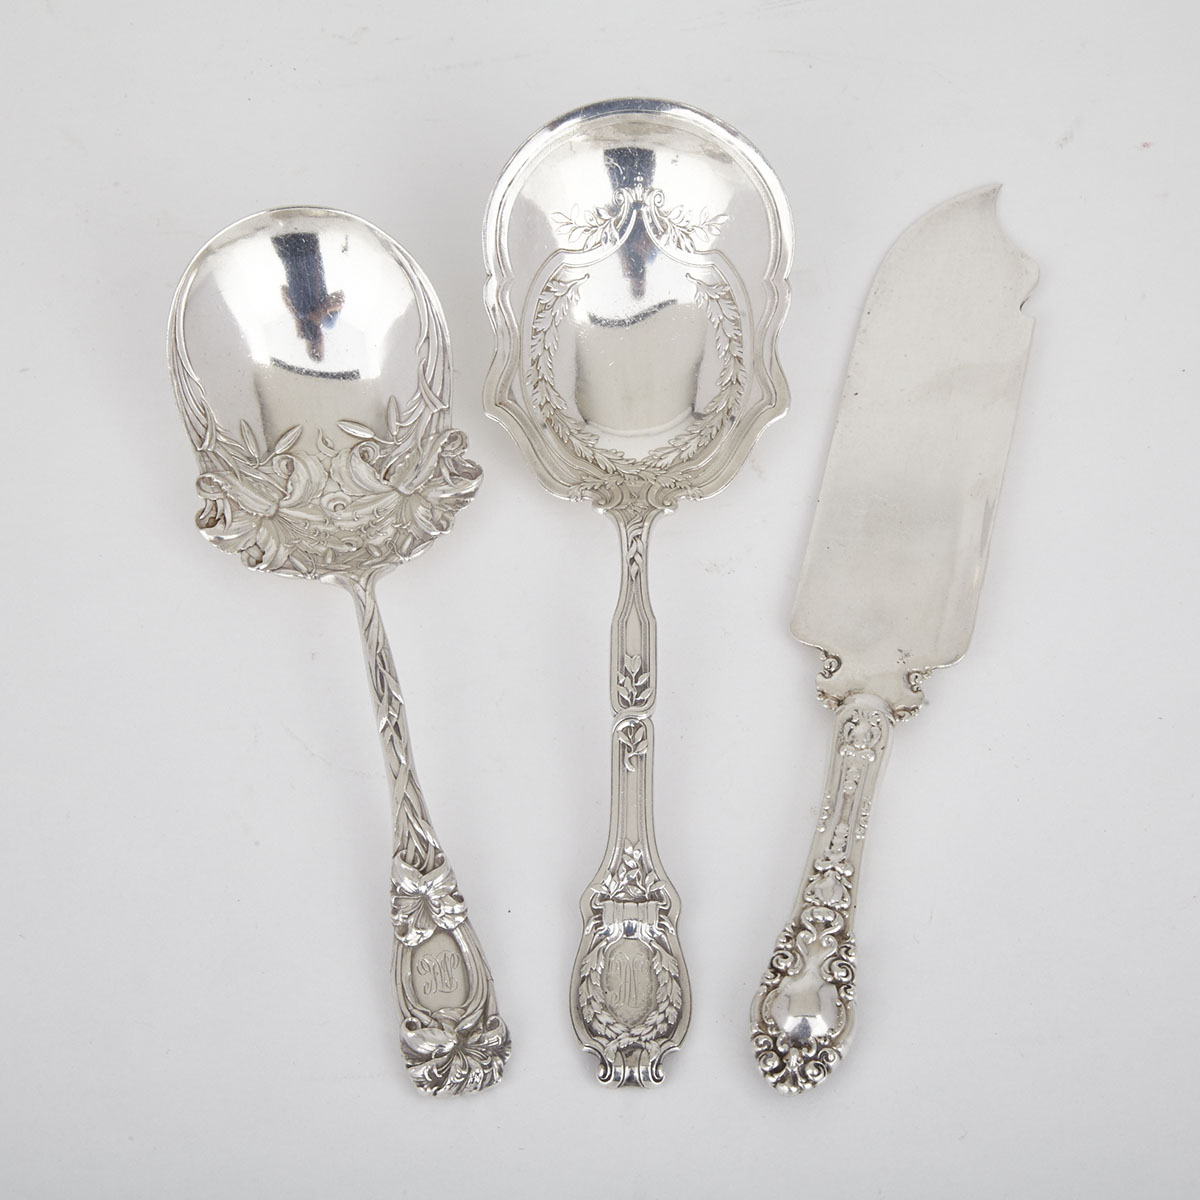 Two American Silver Berry Spoons, Wm. B. Durgin Co., Concord, N.H. and a Canadian Serving Knife, Roden Bros., Toronto, Ont., early 20th century